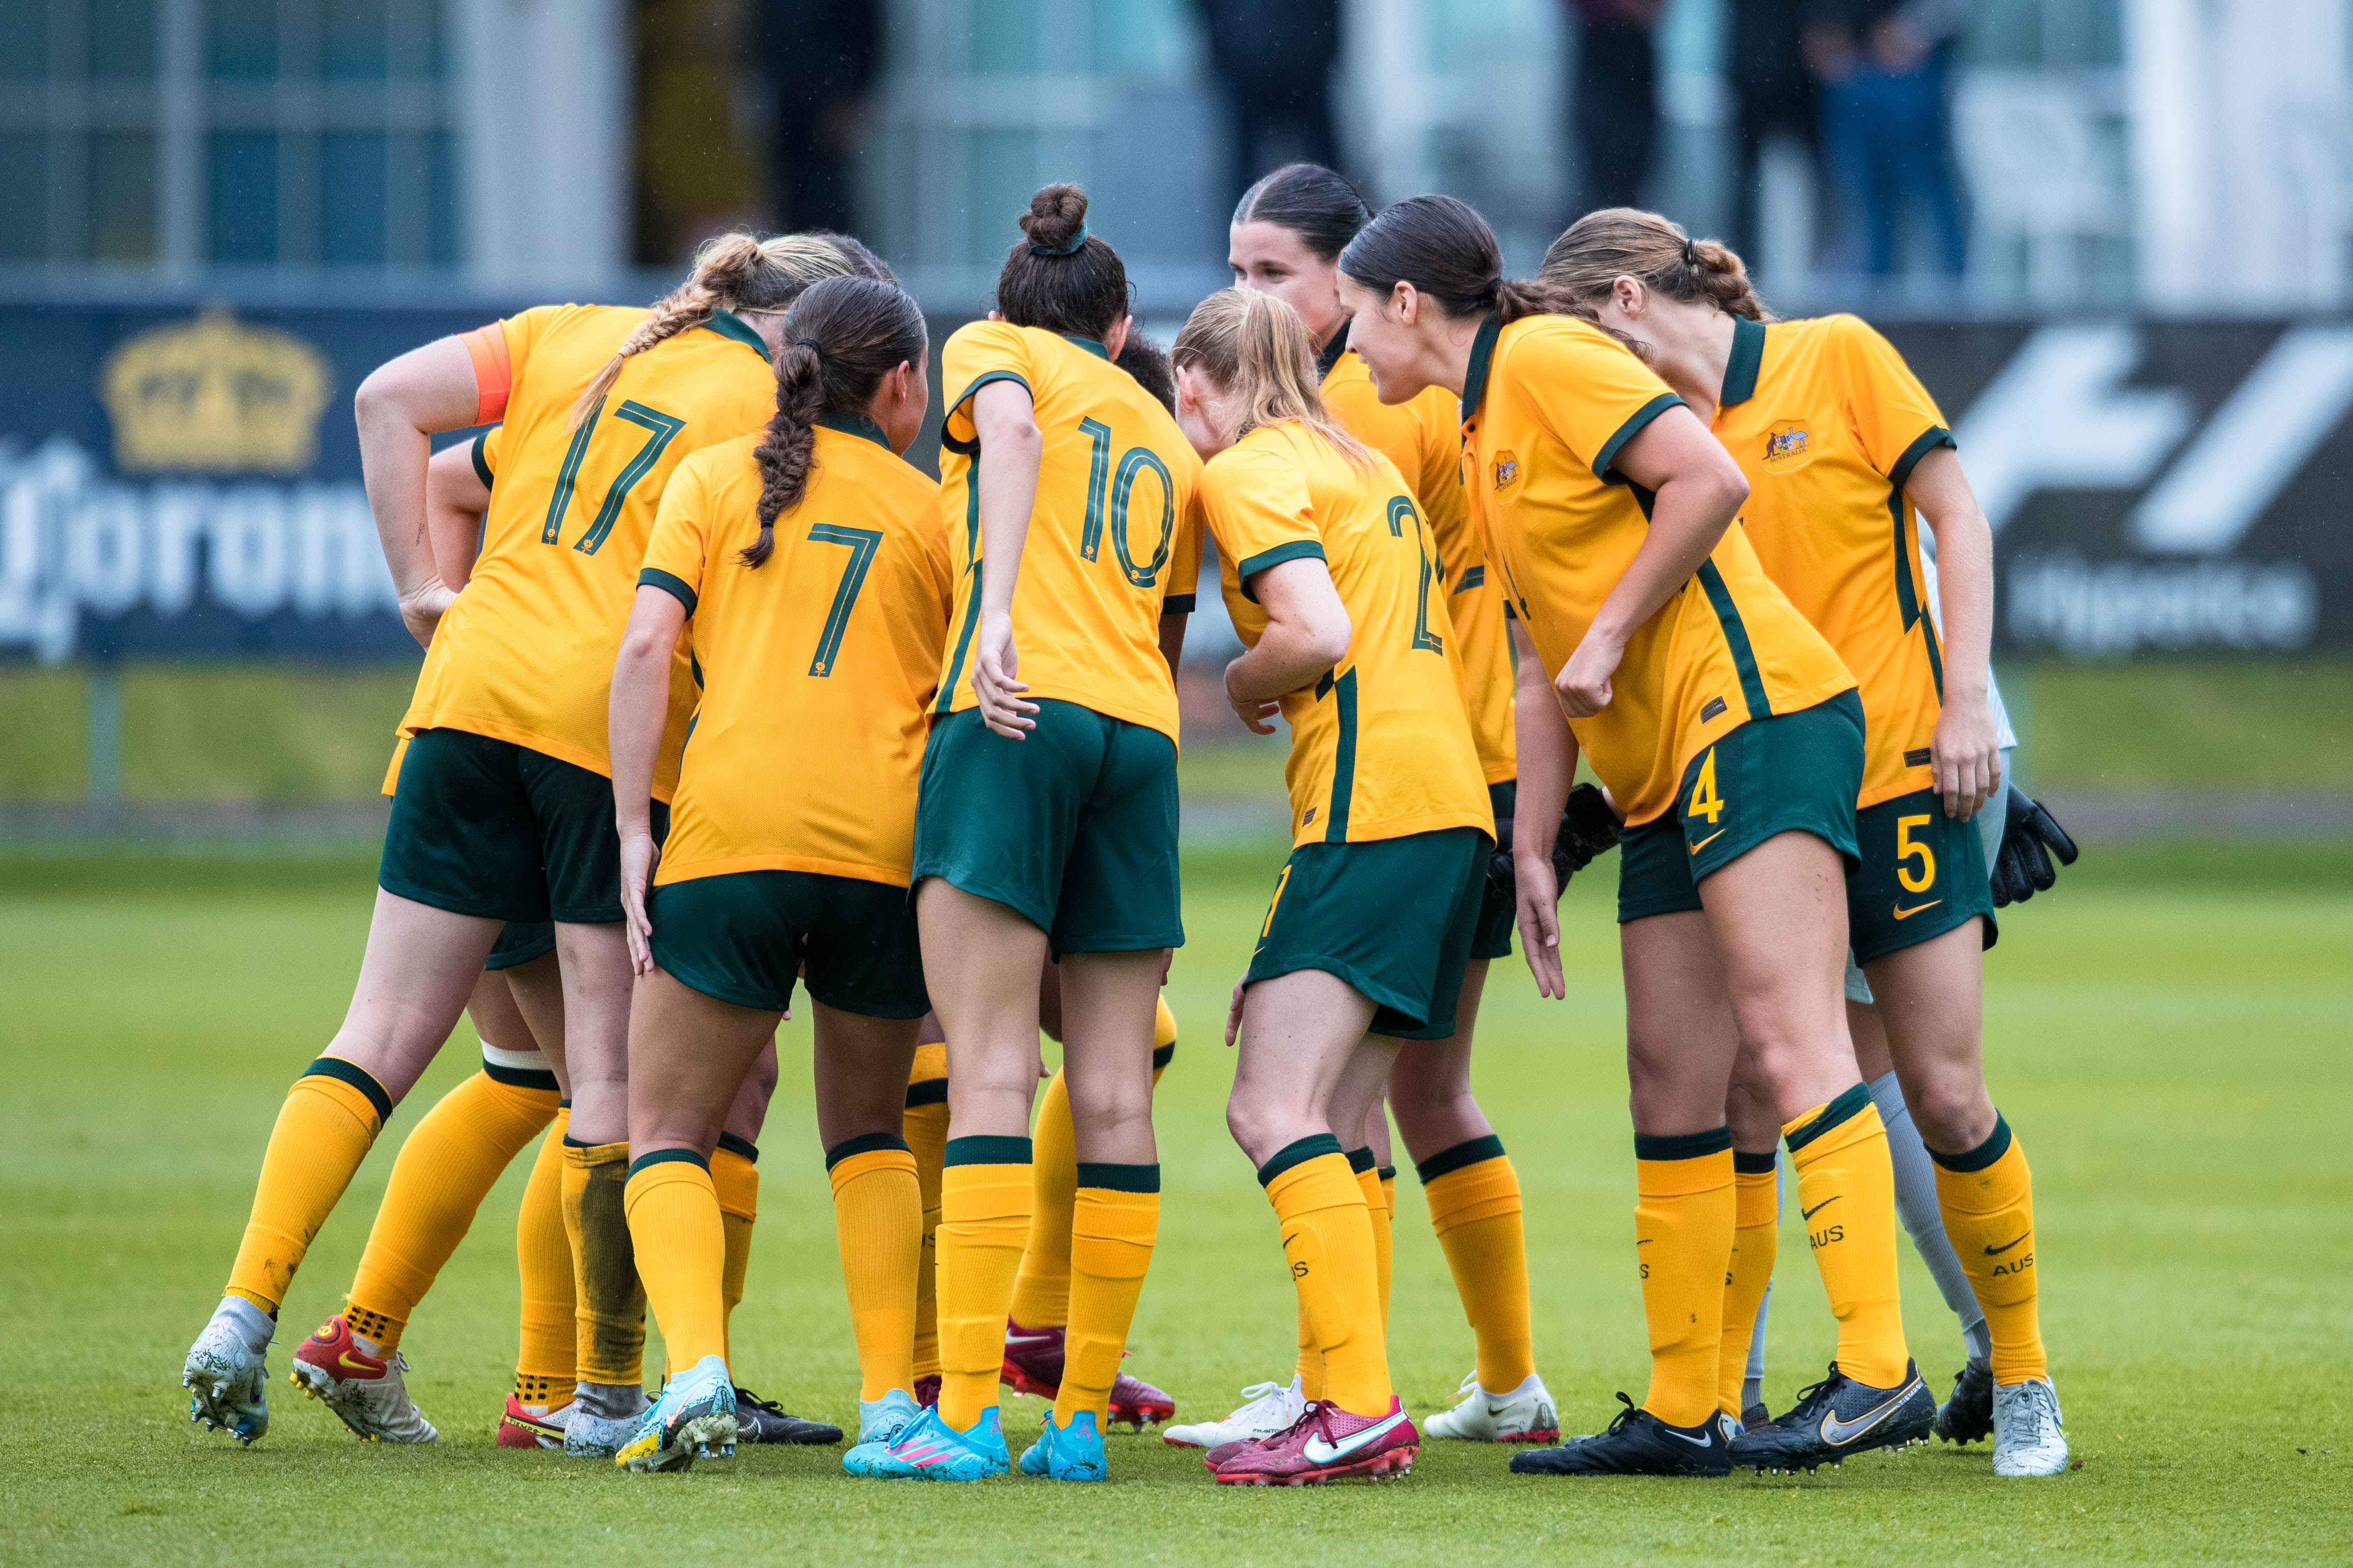 The Young Matildas playing against Mexico's U20 WNT in a closed-door international. (Photo: Ann Odong/Football Australia)